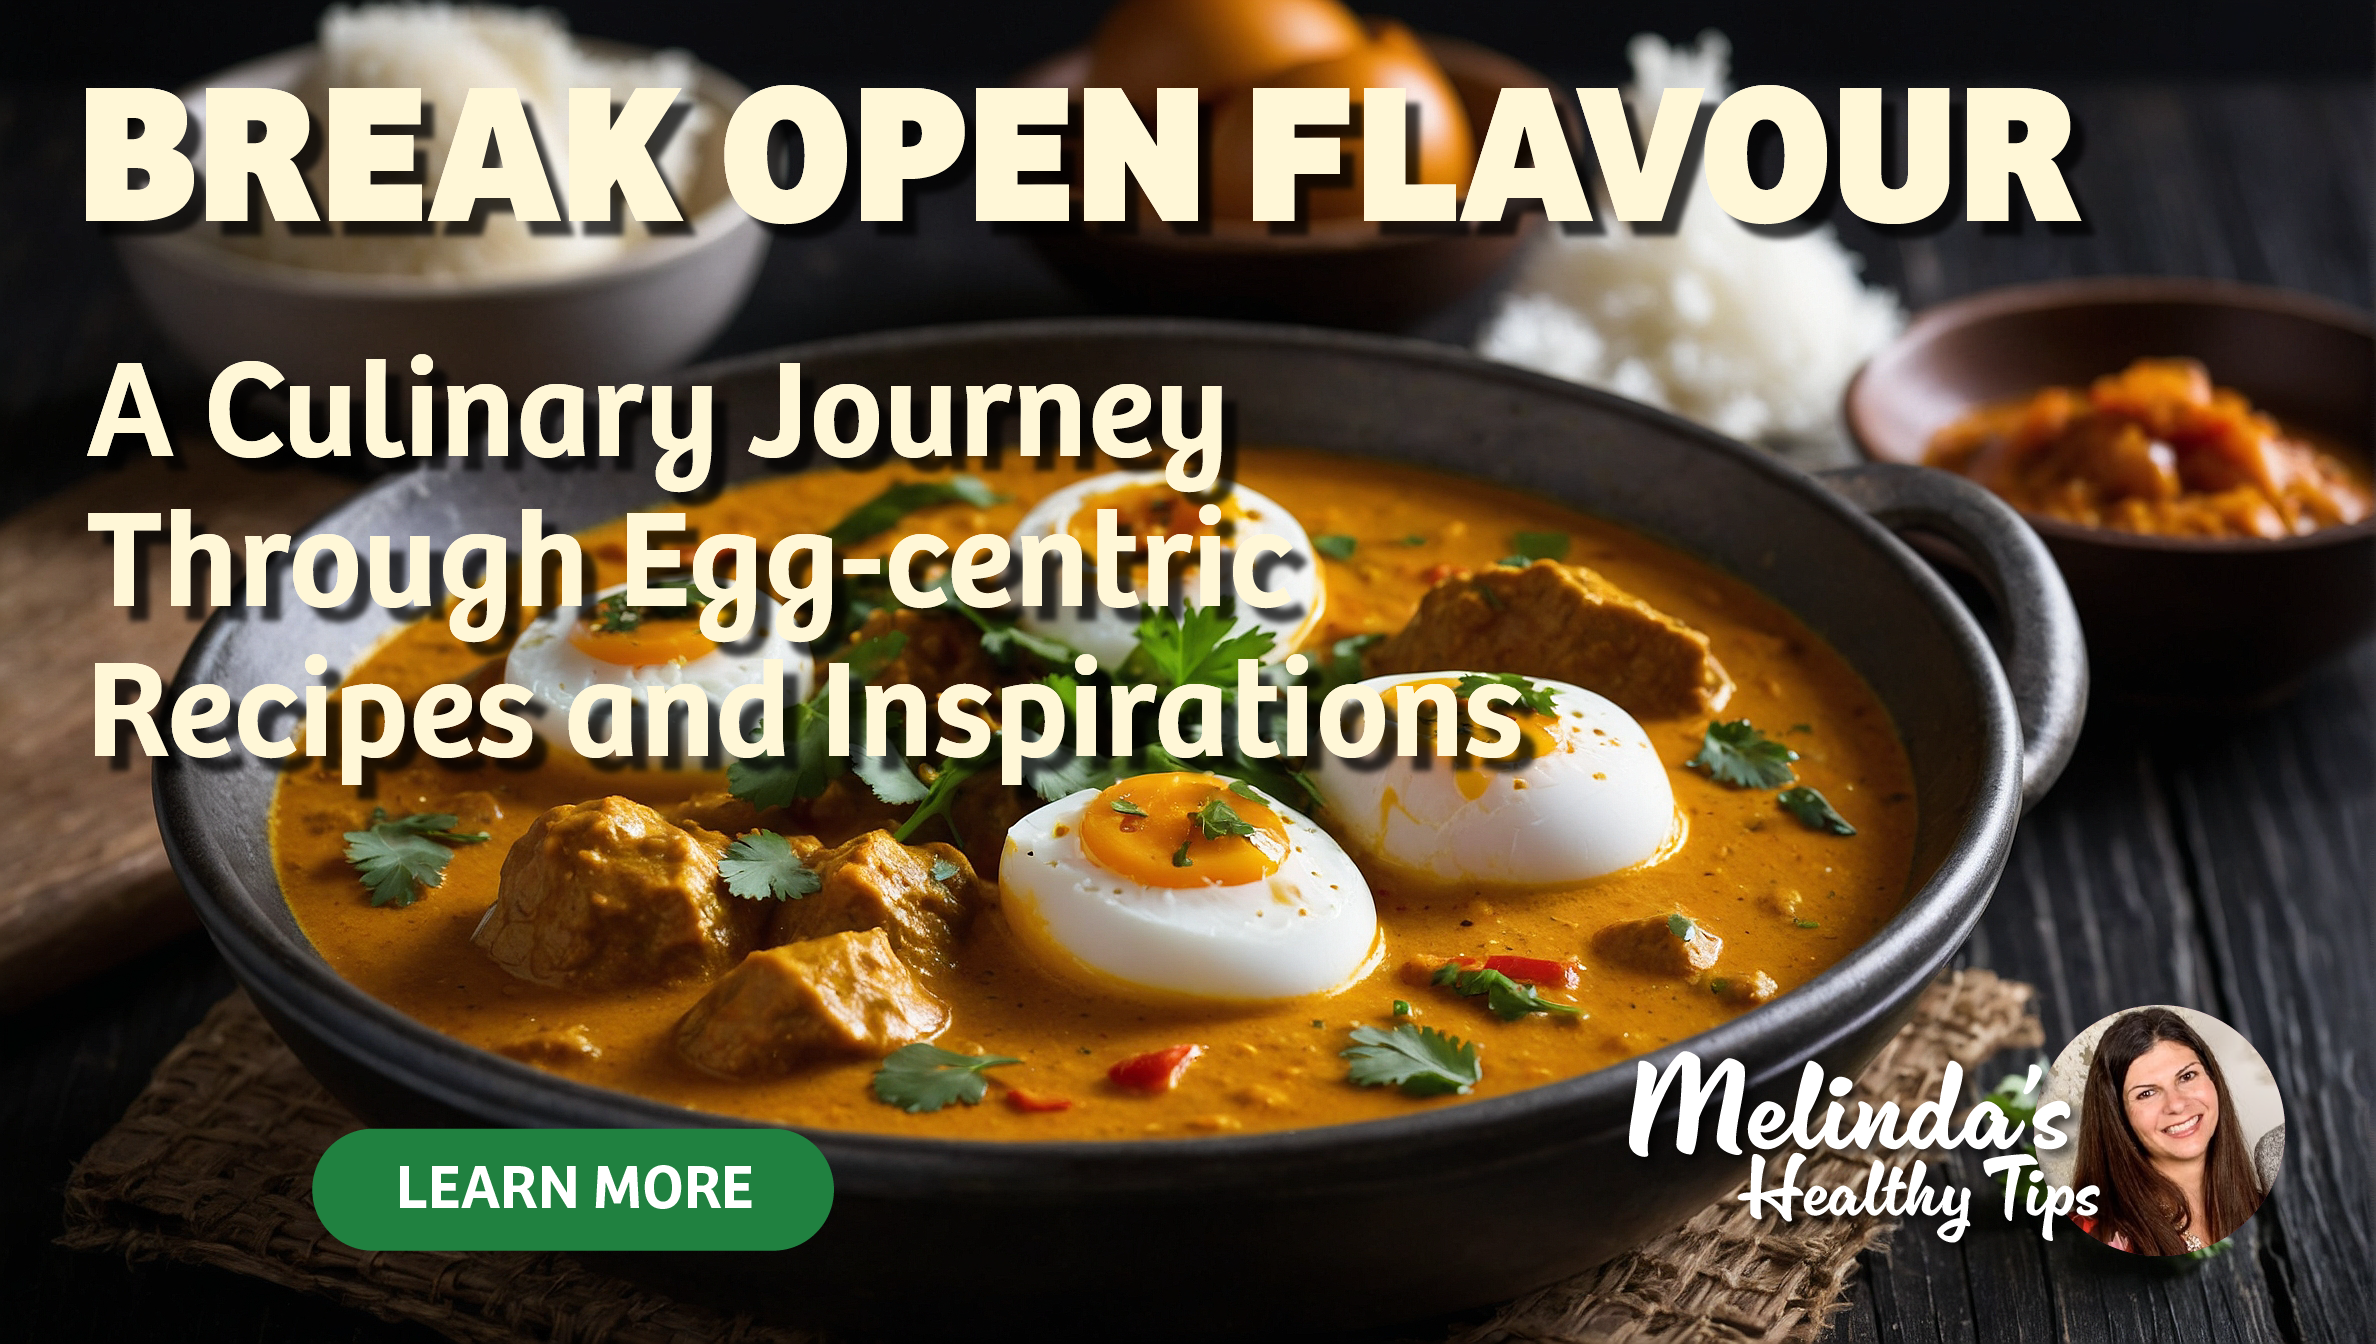 Break Open Flavour: A Culinary Journey Through Egg-centric Recipes and Inspirations